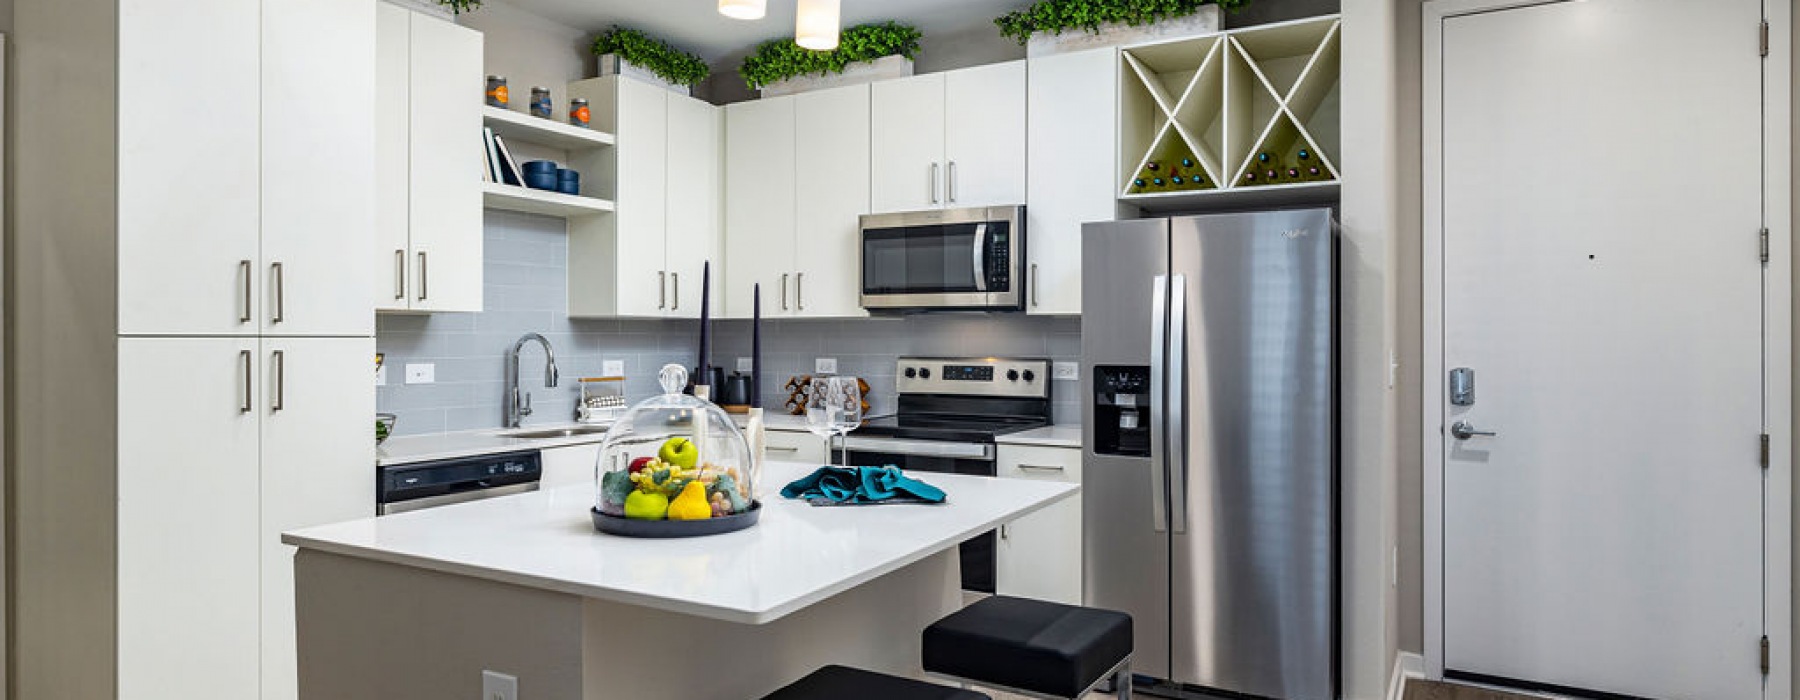 Jade at North Hyde Park Apartments kitchen with stainless steel appliances, modern cabinetry, pendant lighting, island kitchen